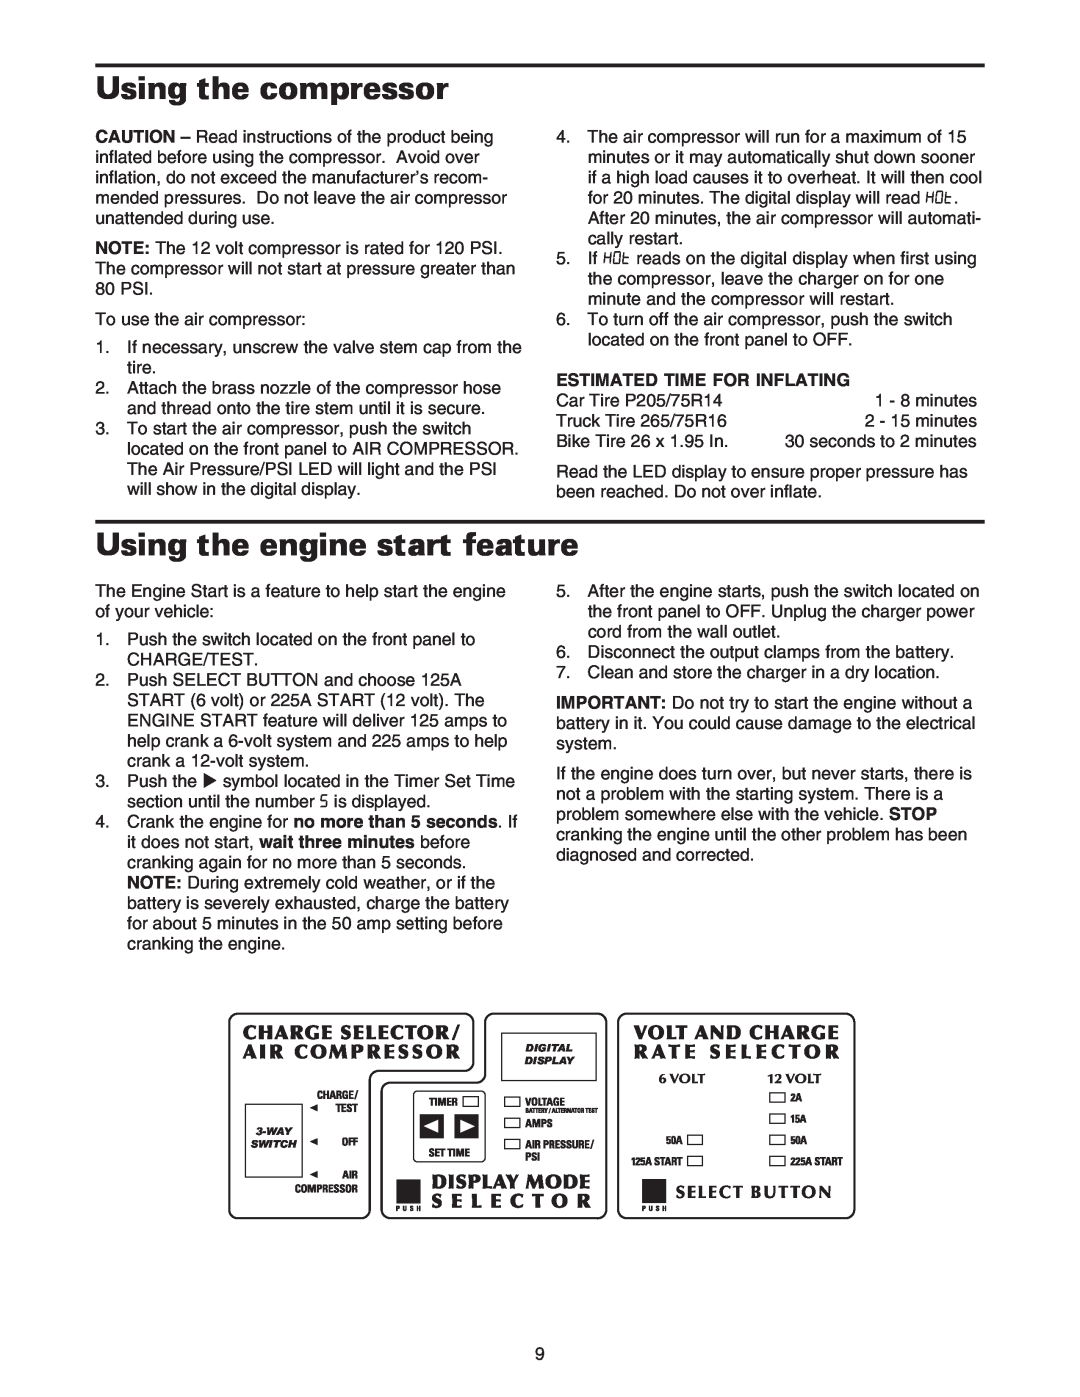 Sears 200.71233 owner manual Using the compressor, Using the engine start feature, Estimated Time For Inflating 